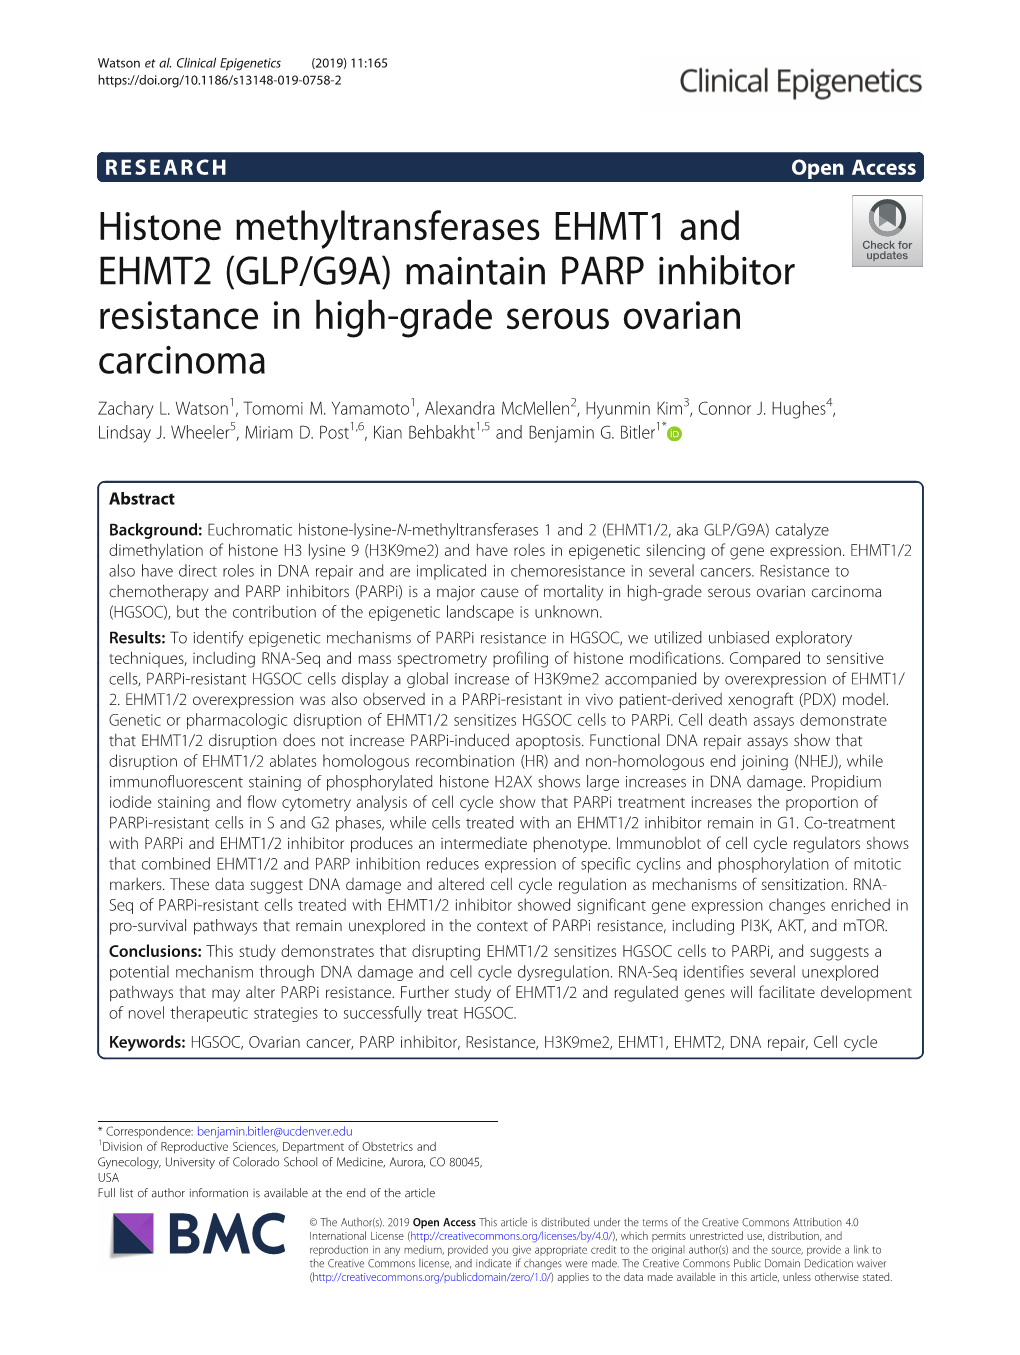 Histone Methyltransferases EHMT1 and EHMT2 (GLP/G9A) Maintain PARP Inhibitor Resistance in High-Grade Serous Ovarian Carcinoma Zachary L